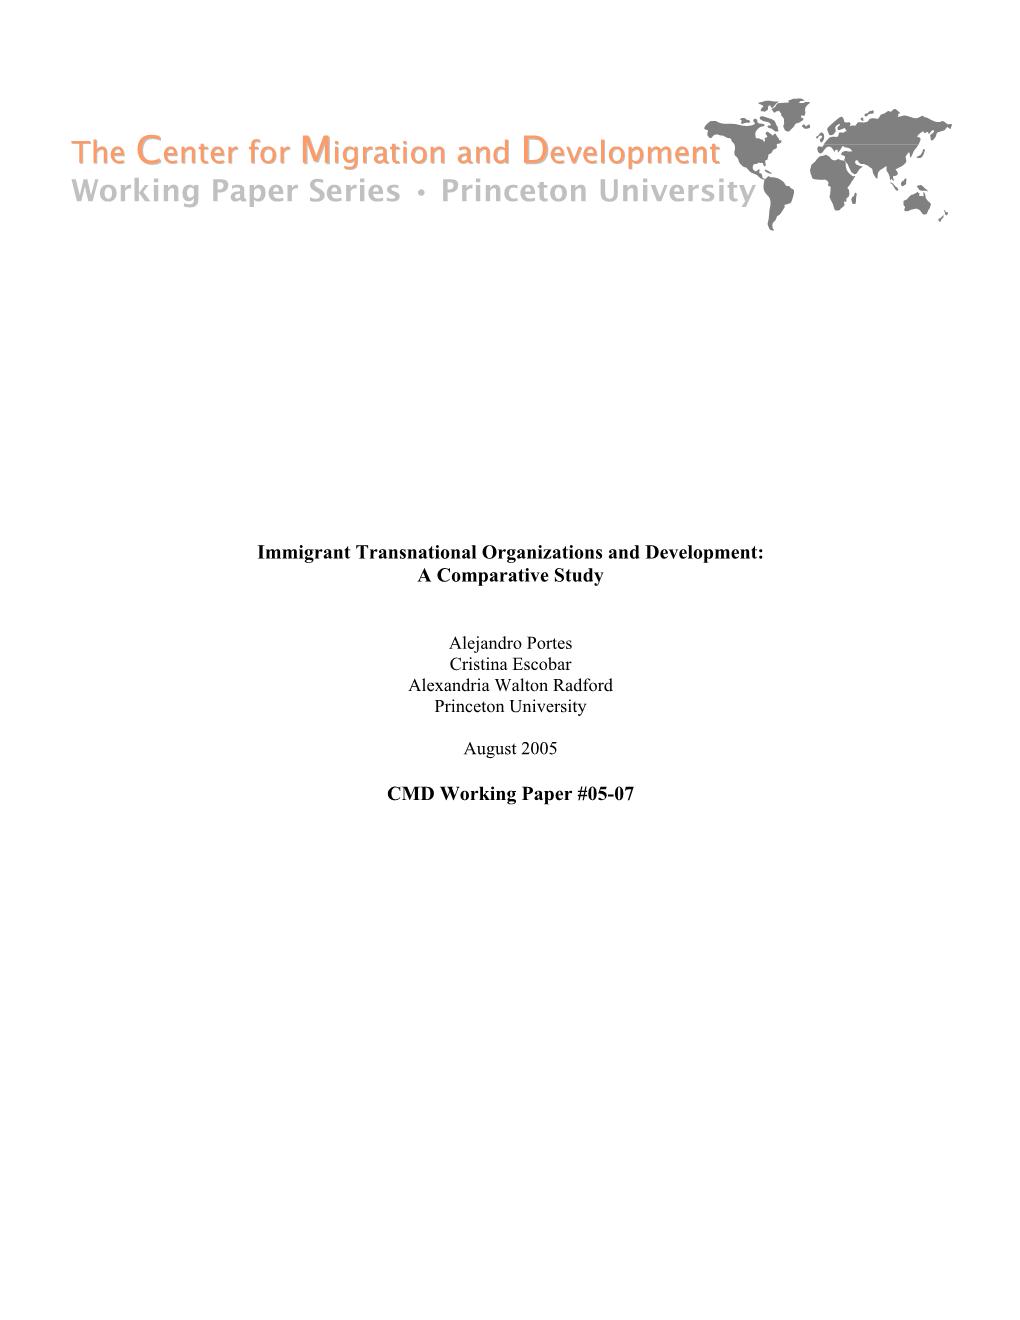 Immigrant Transnational Organizations and Development: a Comparative Study